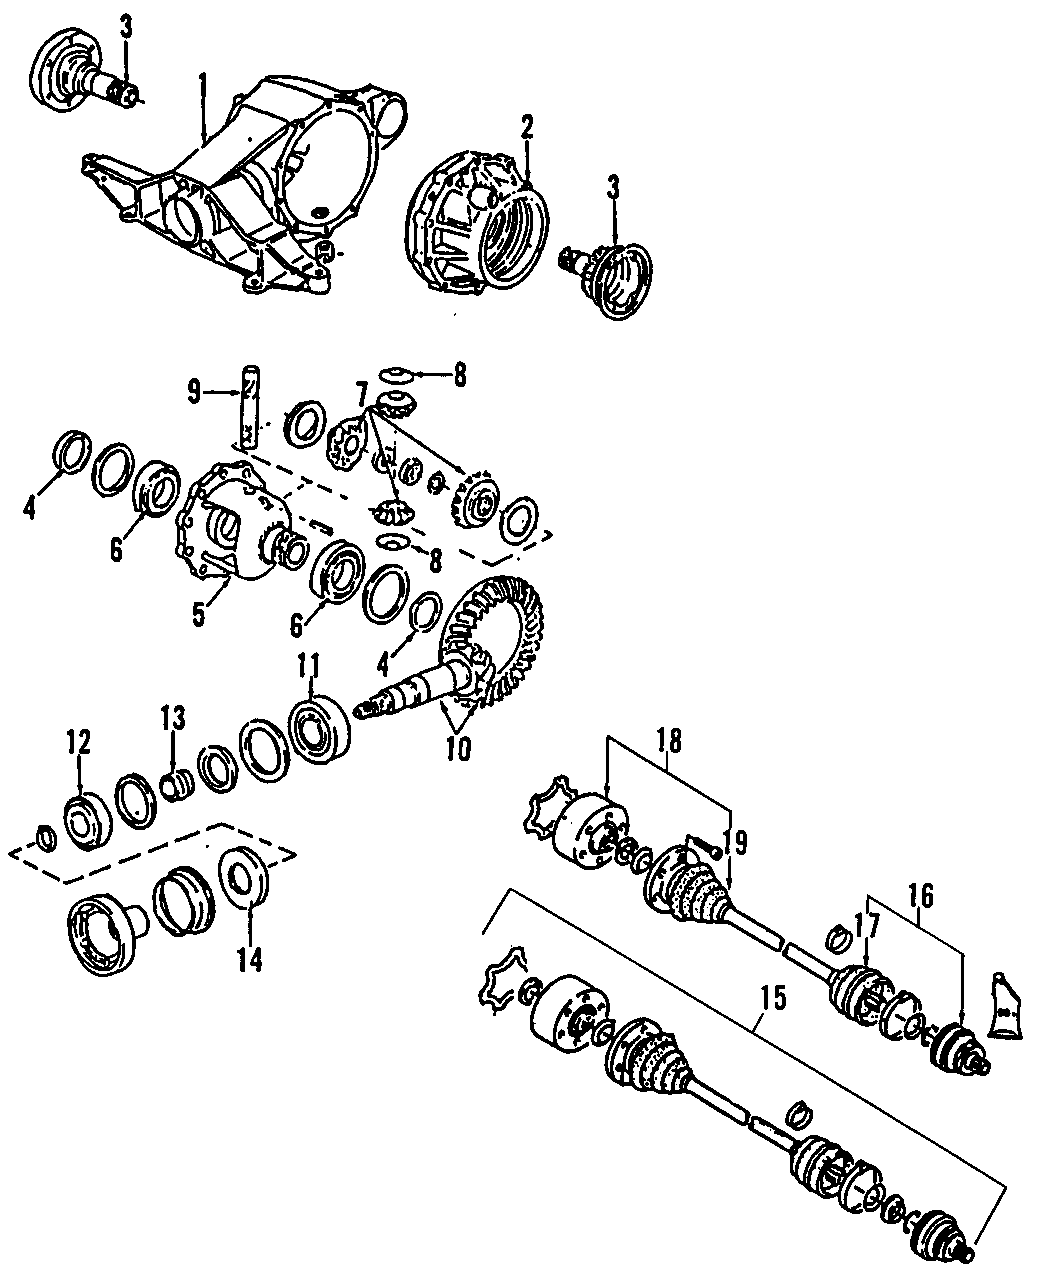 11DRIVE AXLES. REAR AXLE. AXLE SHAFTS & JOINTS. DIFFERENTIAL. PROPELLER SHAFT.https://images.simplepart.com/images/parts/motor/fullsize/F208150.png